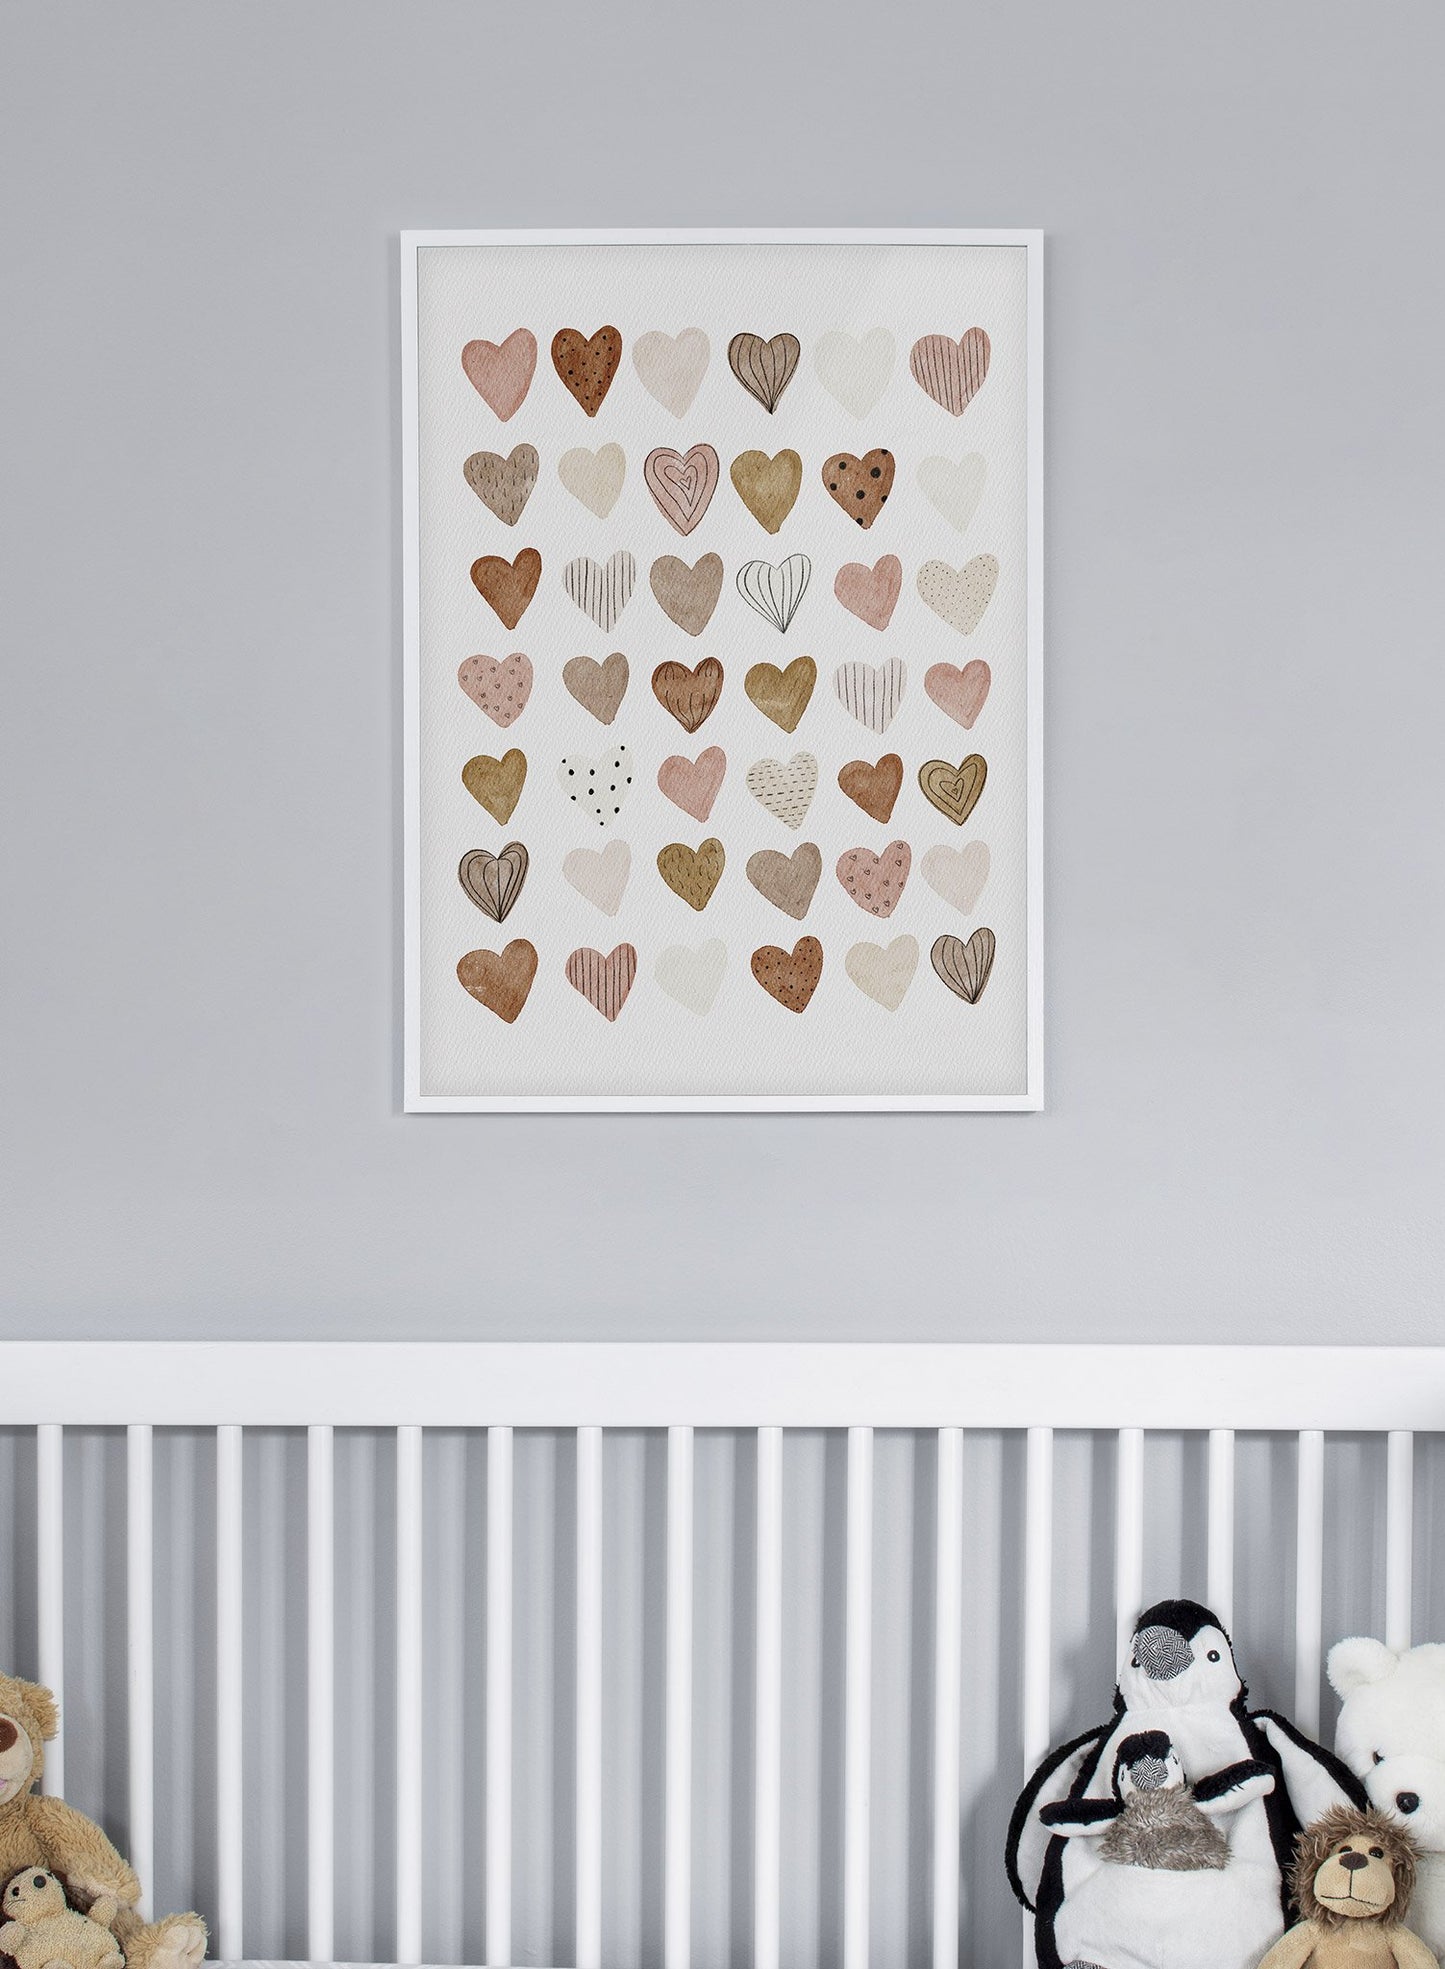 Kids nursery poster by Opposite Wall with watercolour hearts - Lifestyle - Kids Nursery